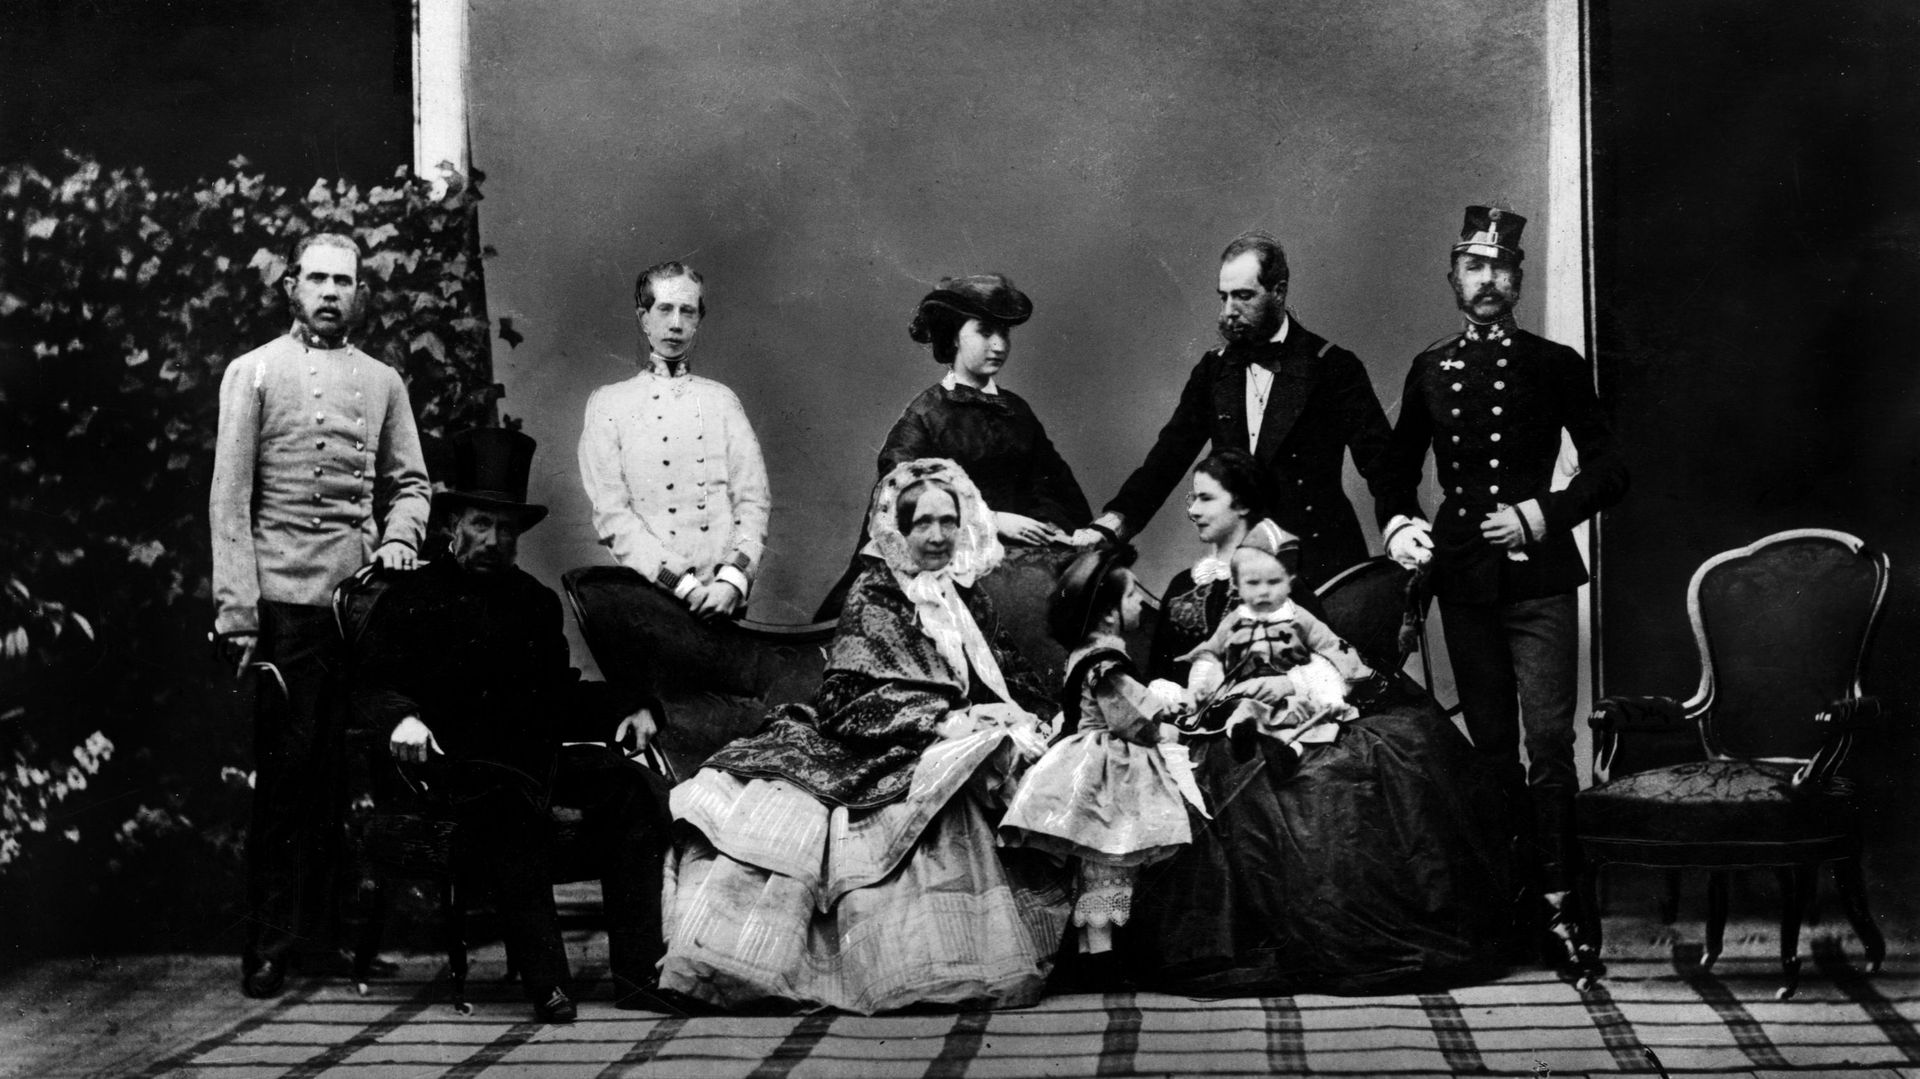 The Family Of Emperor Francis Joseph I Of Austria. Archduke Francis Charles of Habsburg-Lorraine and his wife Sophie of Wittelsbach posing with their sons Francis Joseph, Louis Victor, Ferdinand Maximilian and Charles Louis, their daughters-in-law Elizabe